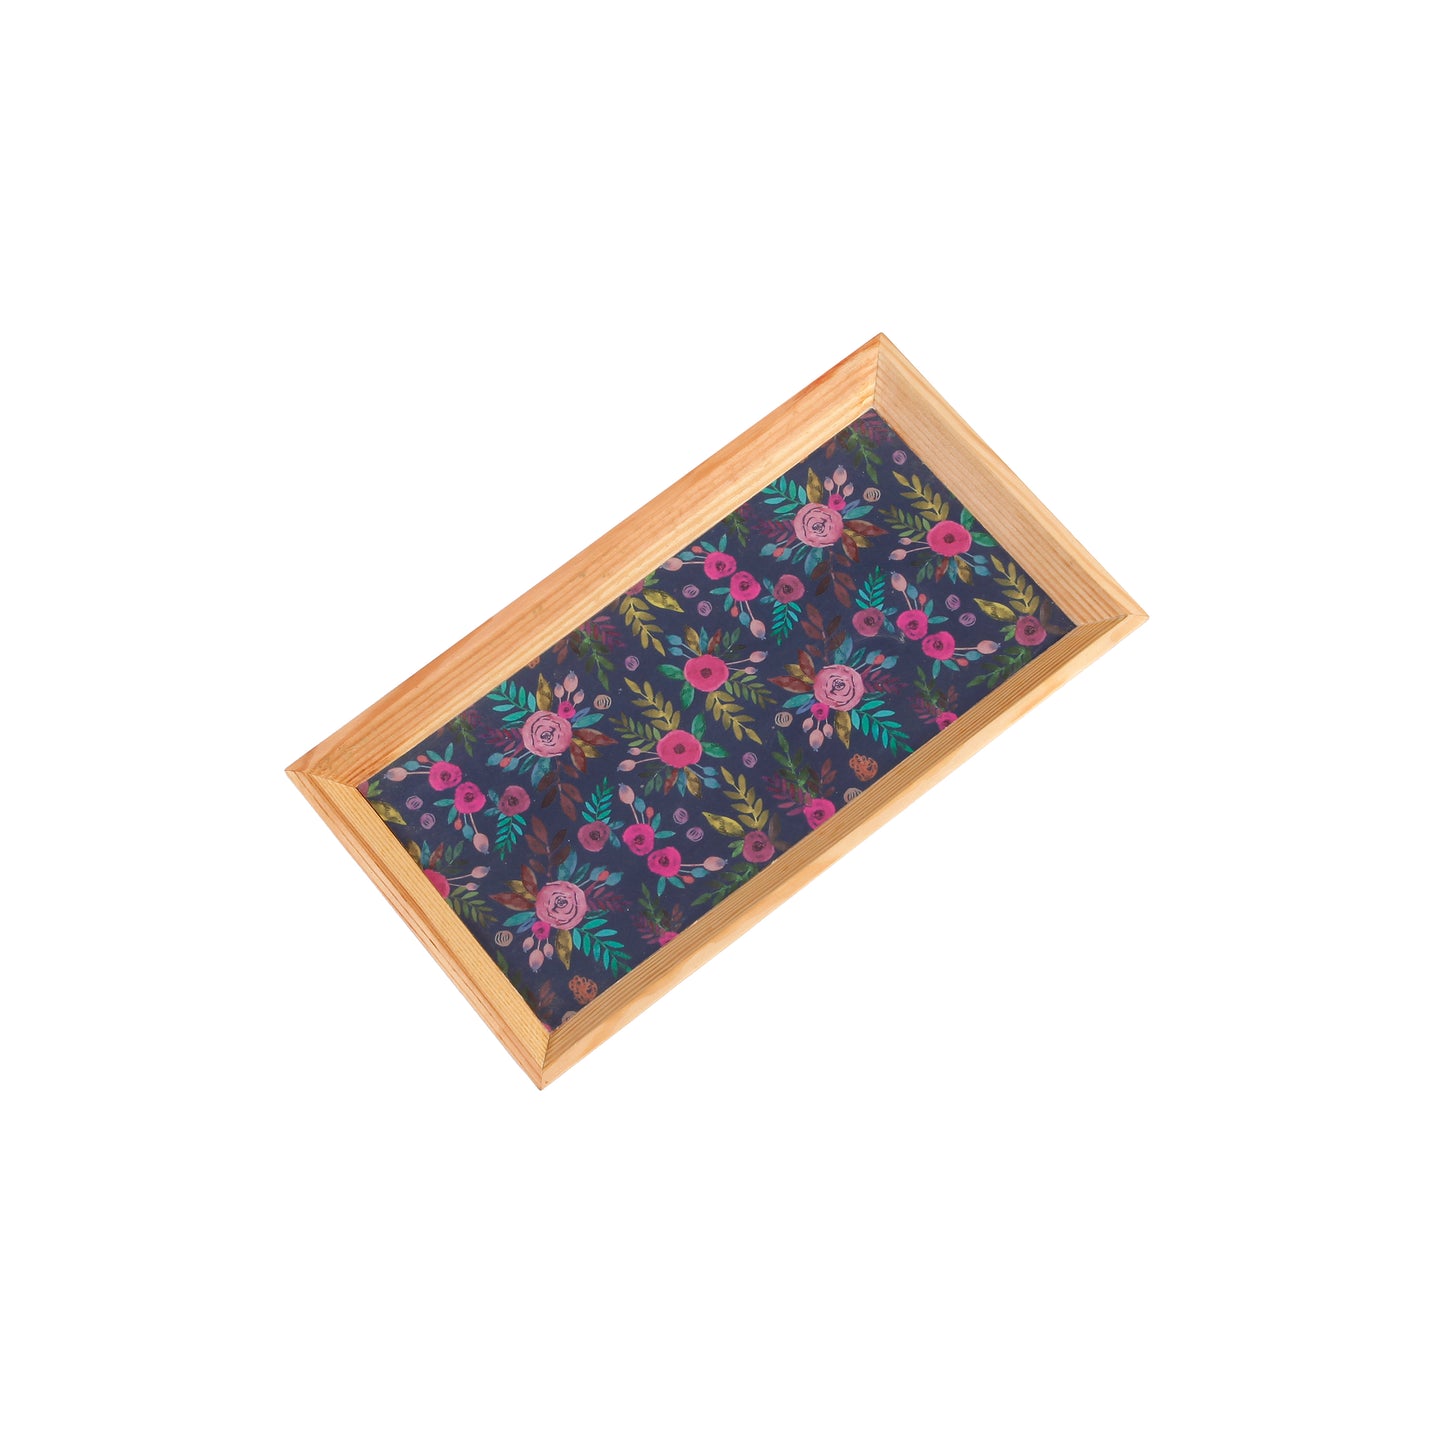 A Tiny Mistake Blue Floral Pattern Rectangle Wooden Serving Tray, 35 x 20 x 2 cm